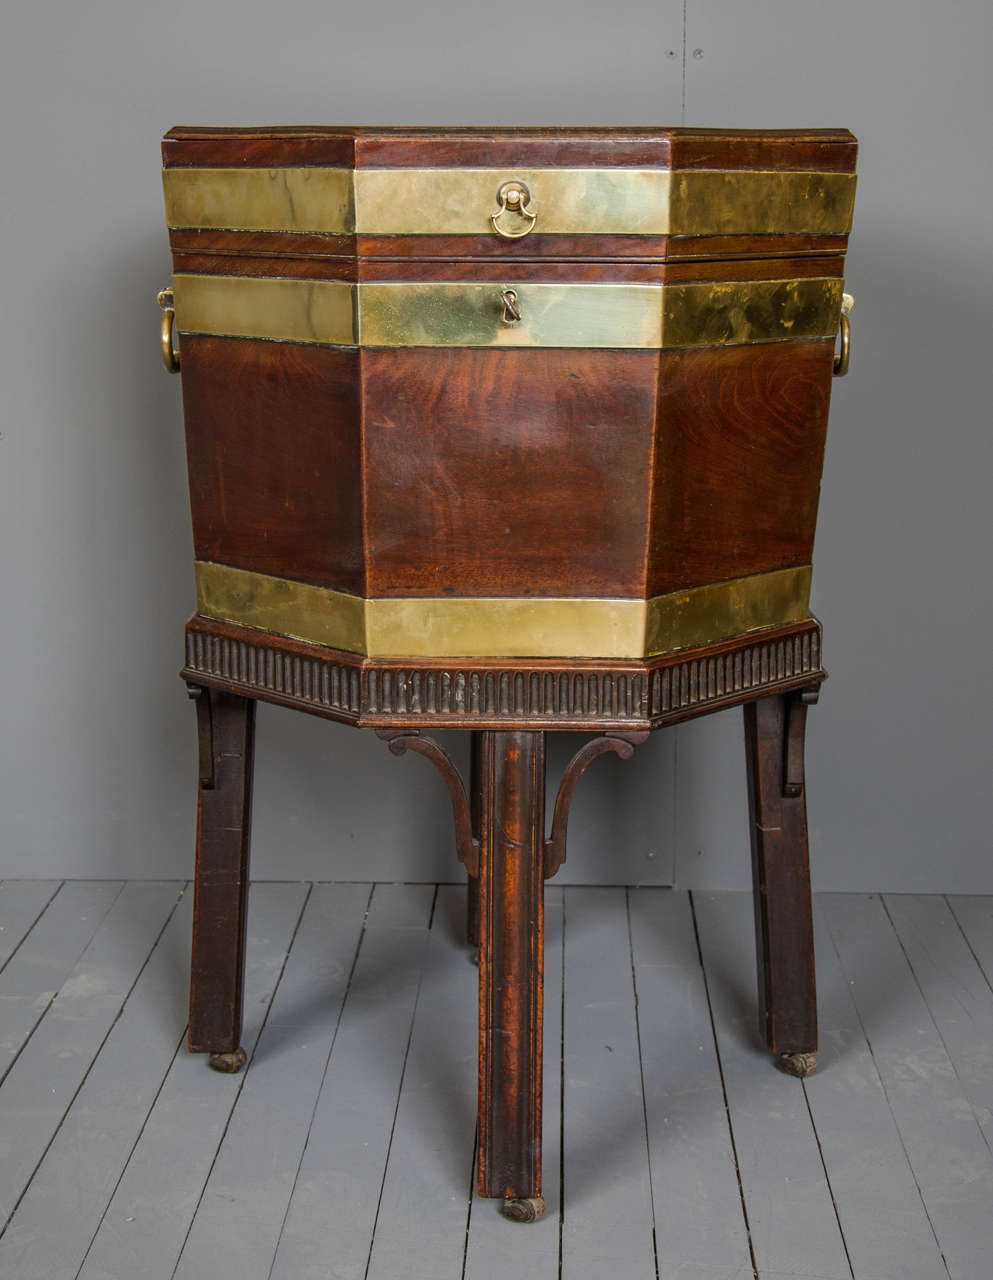 This superb quality George III mahogany wine cooler features a more unusual octagonal shape with decorative brass banding, a lovely patina and a double hinge on the back. The cooler has the original zinc lining, petitioned into seven sections, and